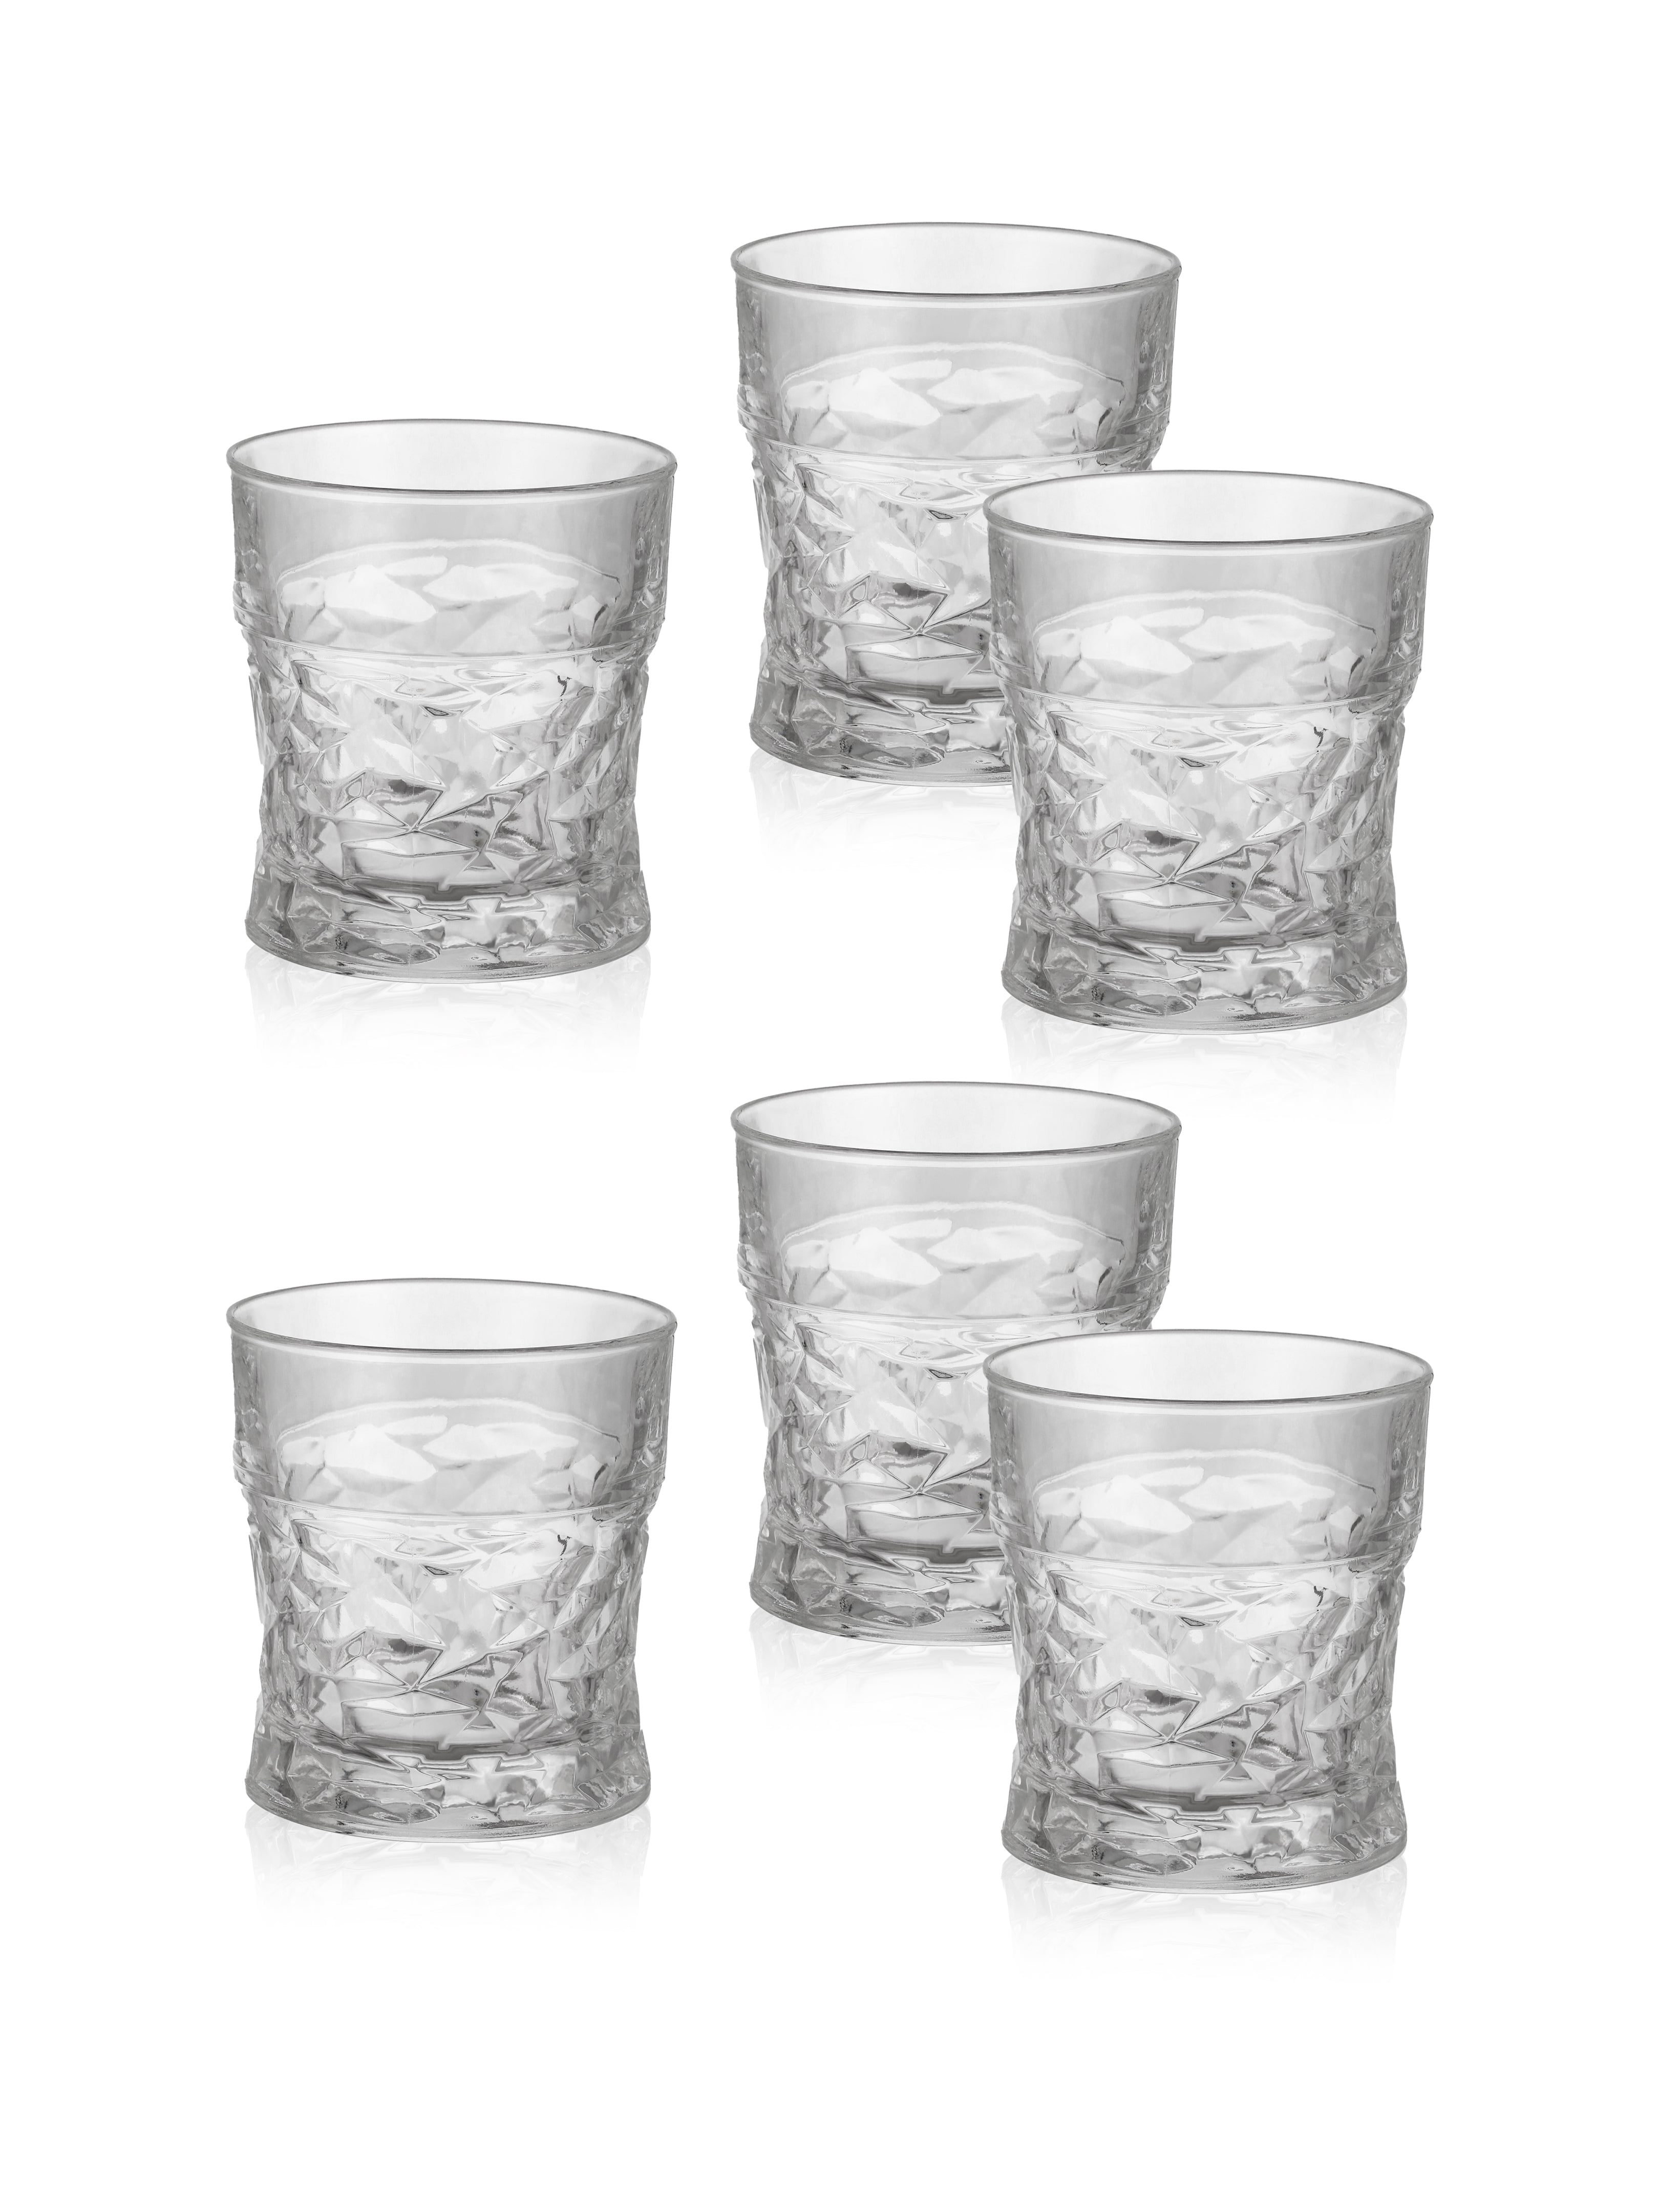 ECLECTIC CRYSTAL WHISKEY GLASS - ITALIAN CRYSTAL - SET OF 6